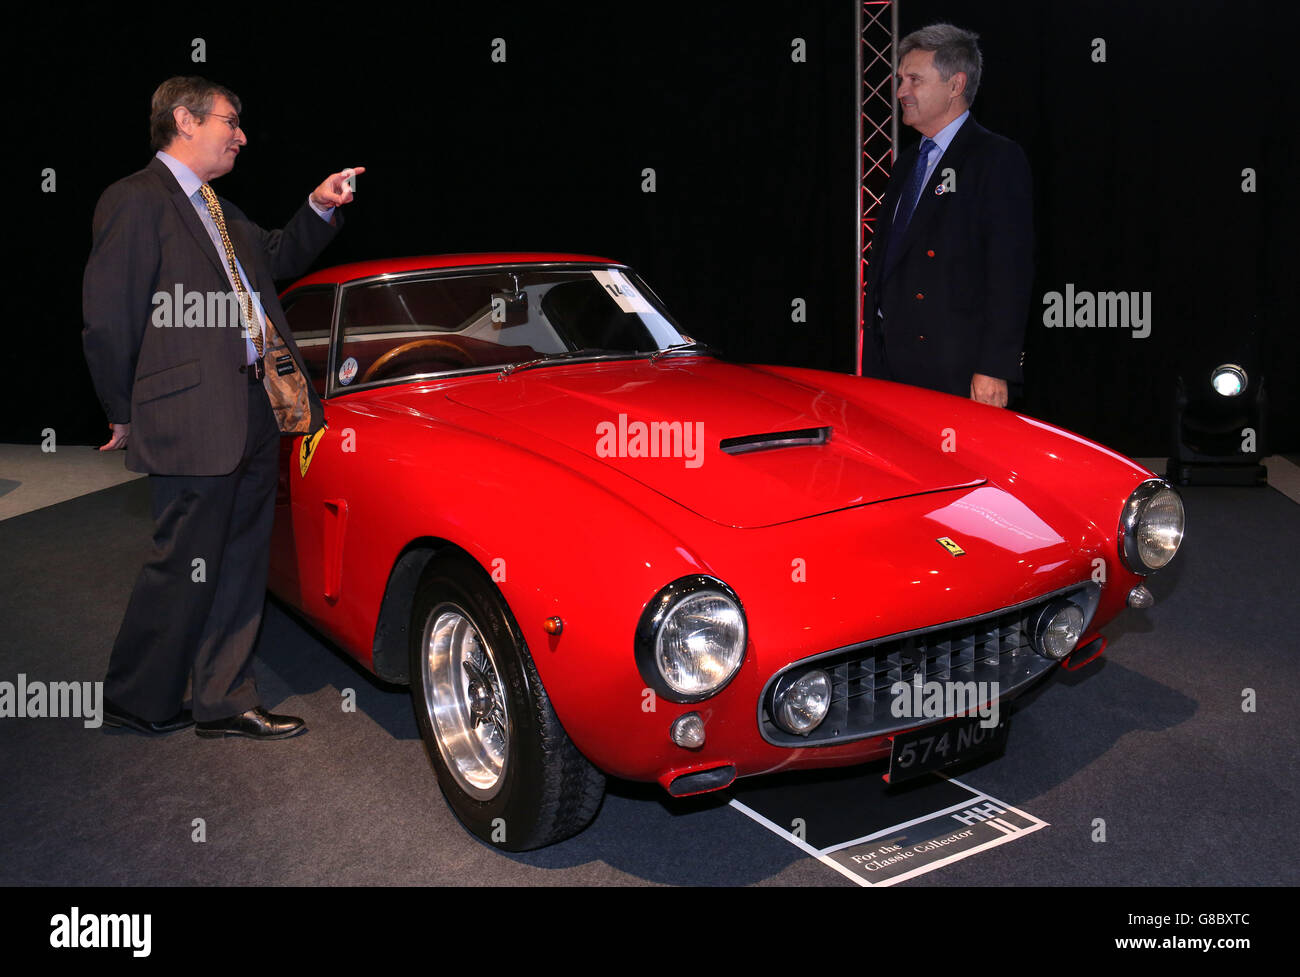 (L to R) Charles Denton, godson and executor to the estate of the late Richard Colton with RNLI Chief Executive Paul Boissier, stand next to a 1960 Ferrari 250 GT short-wheelbase (SWB) Berlinetta chassis 1995 GT, of which just 167 were made with a mere ten being supplied new to the UK market, one of the star lots with no reserve, on display prior to the H&H Classics, classic cars and motorcycles sale, at the Imperial War Museum, Duxford, one of two of the rarest and most sought-after Ferraris ever made which are being sold to raise funds for the Royal National Lifeboat Institution (RNLI). Stock Photo